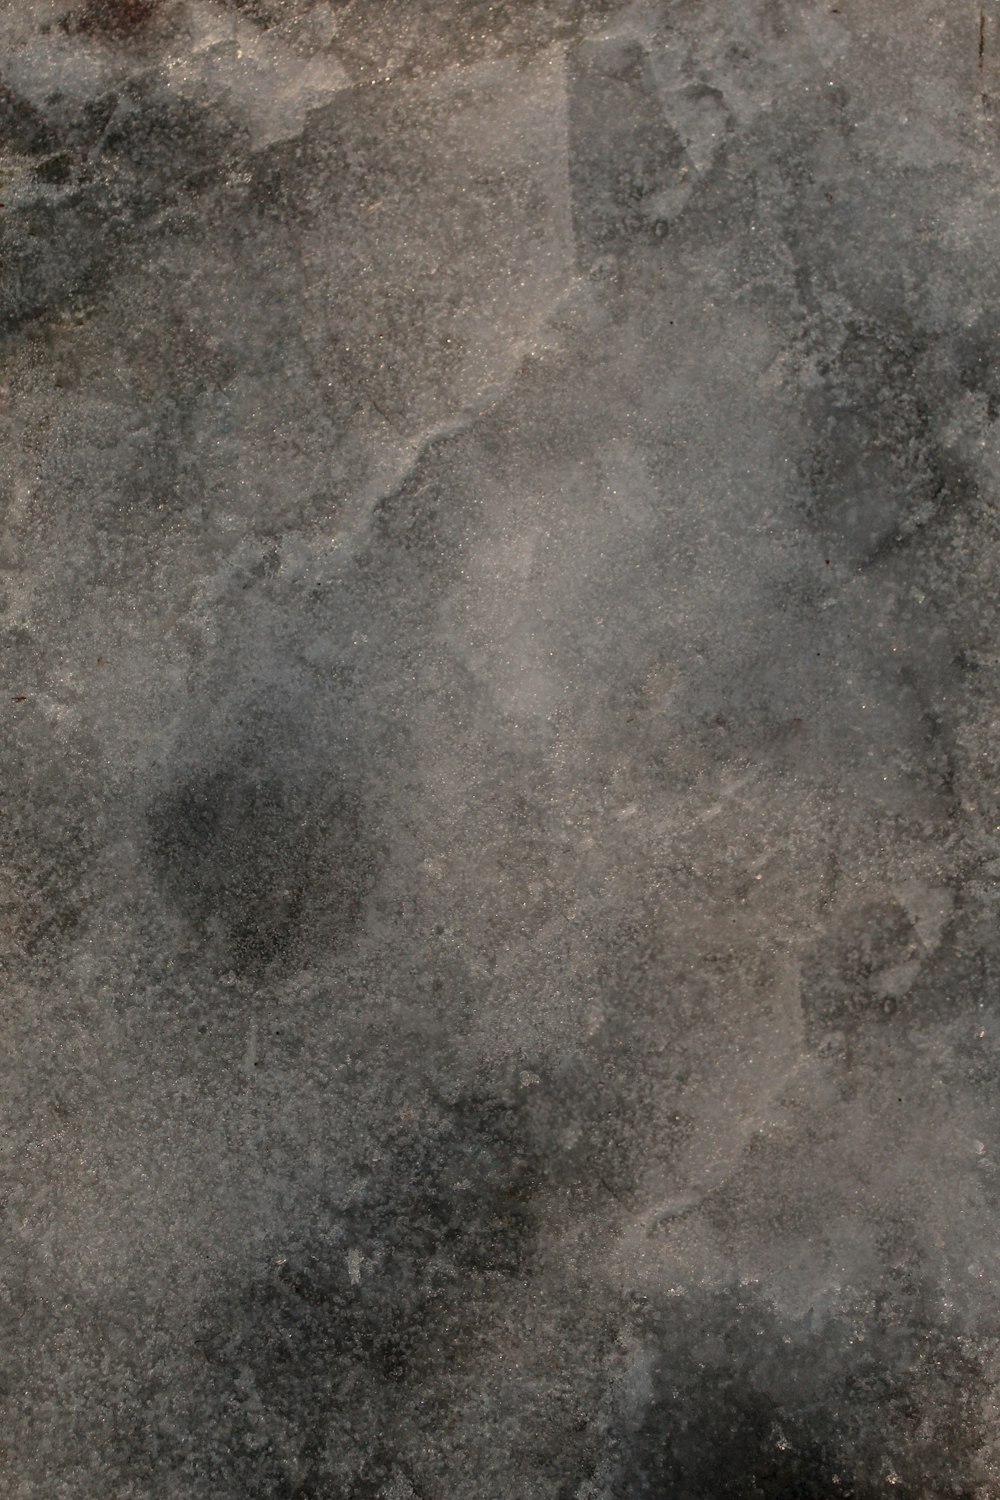 brown and gray concrete floor